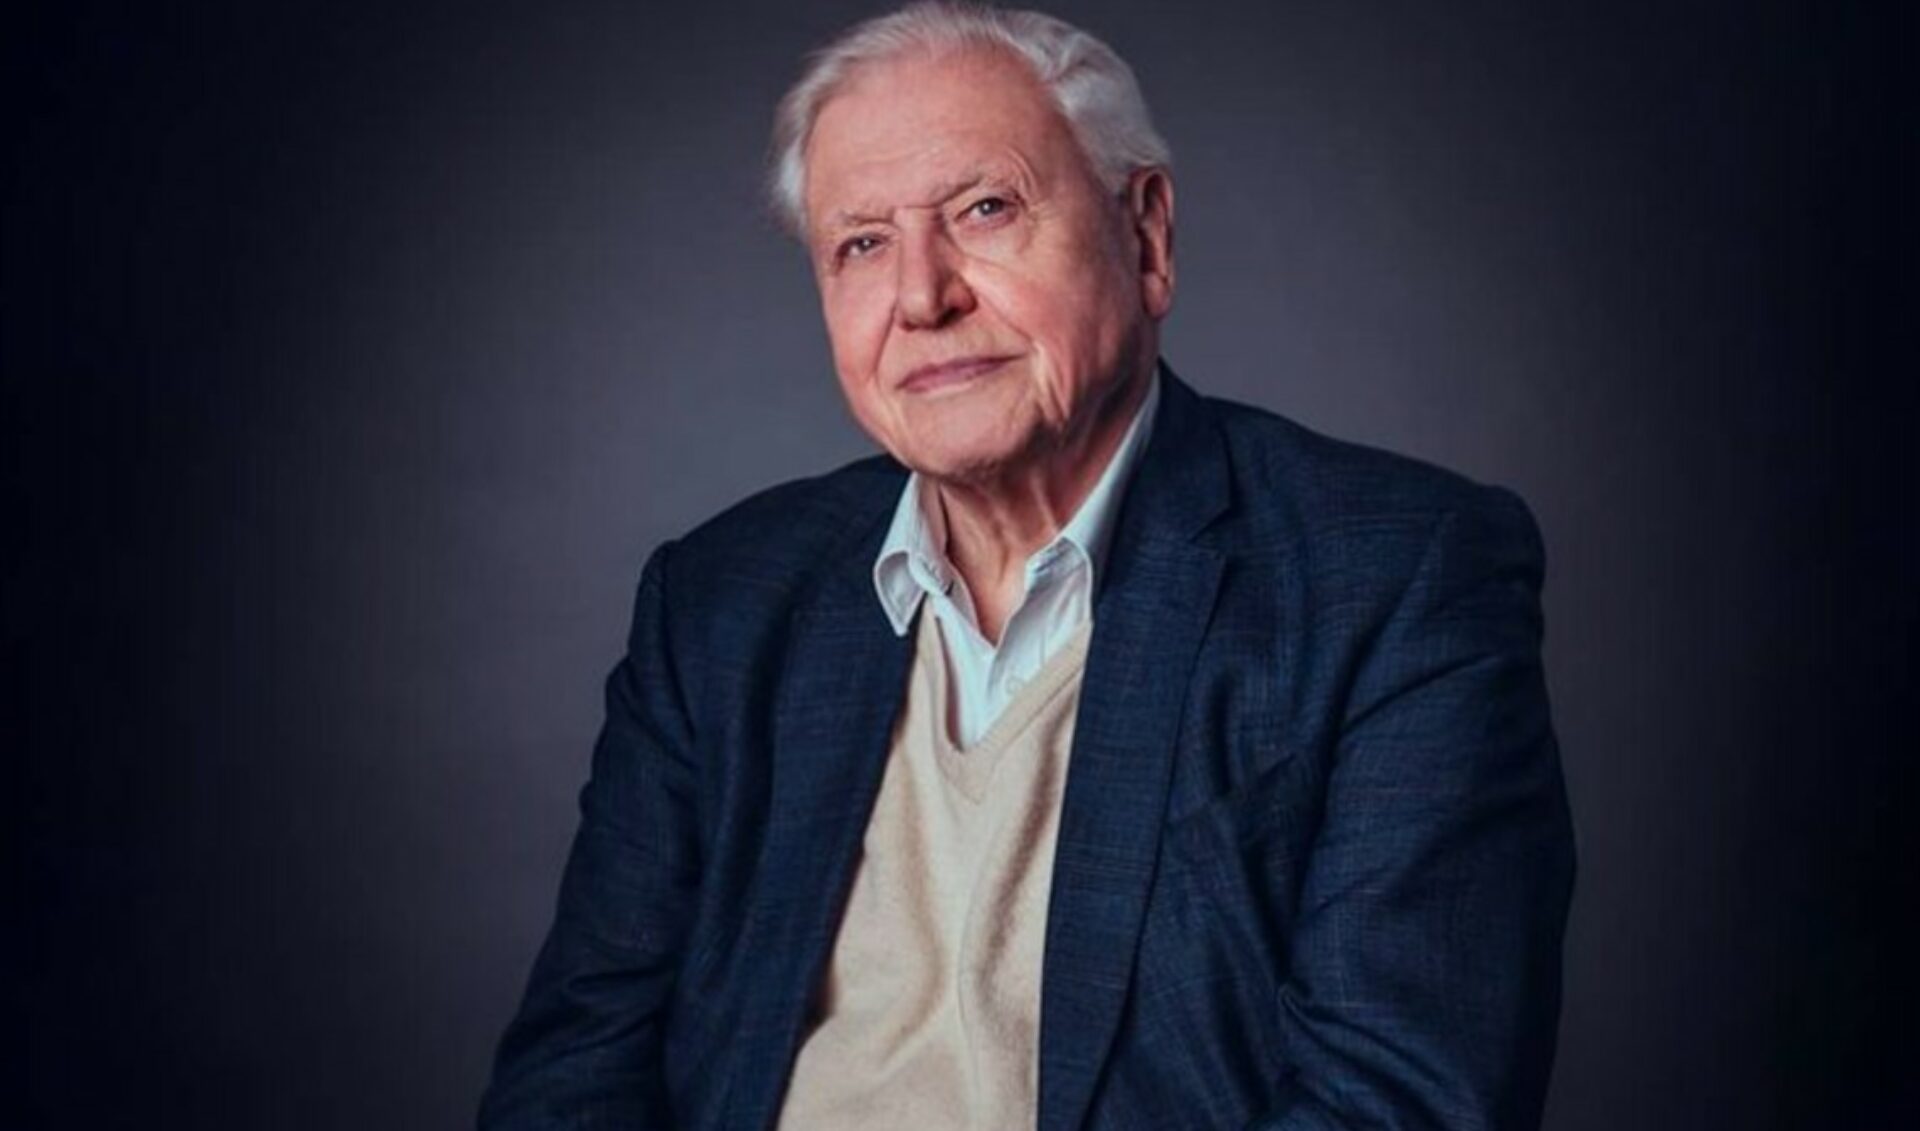 David Attenborough Departs Instagram Mere Months After Record-Breaking Foray